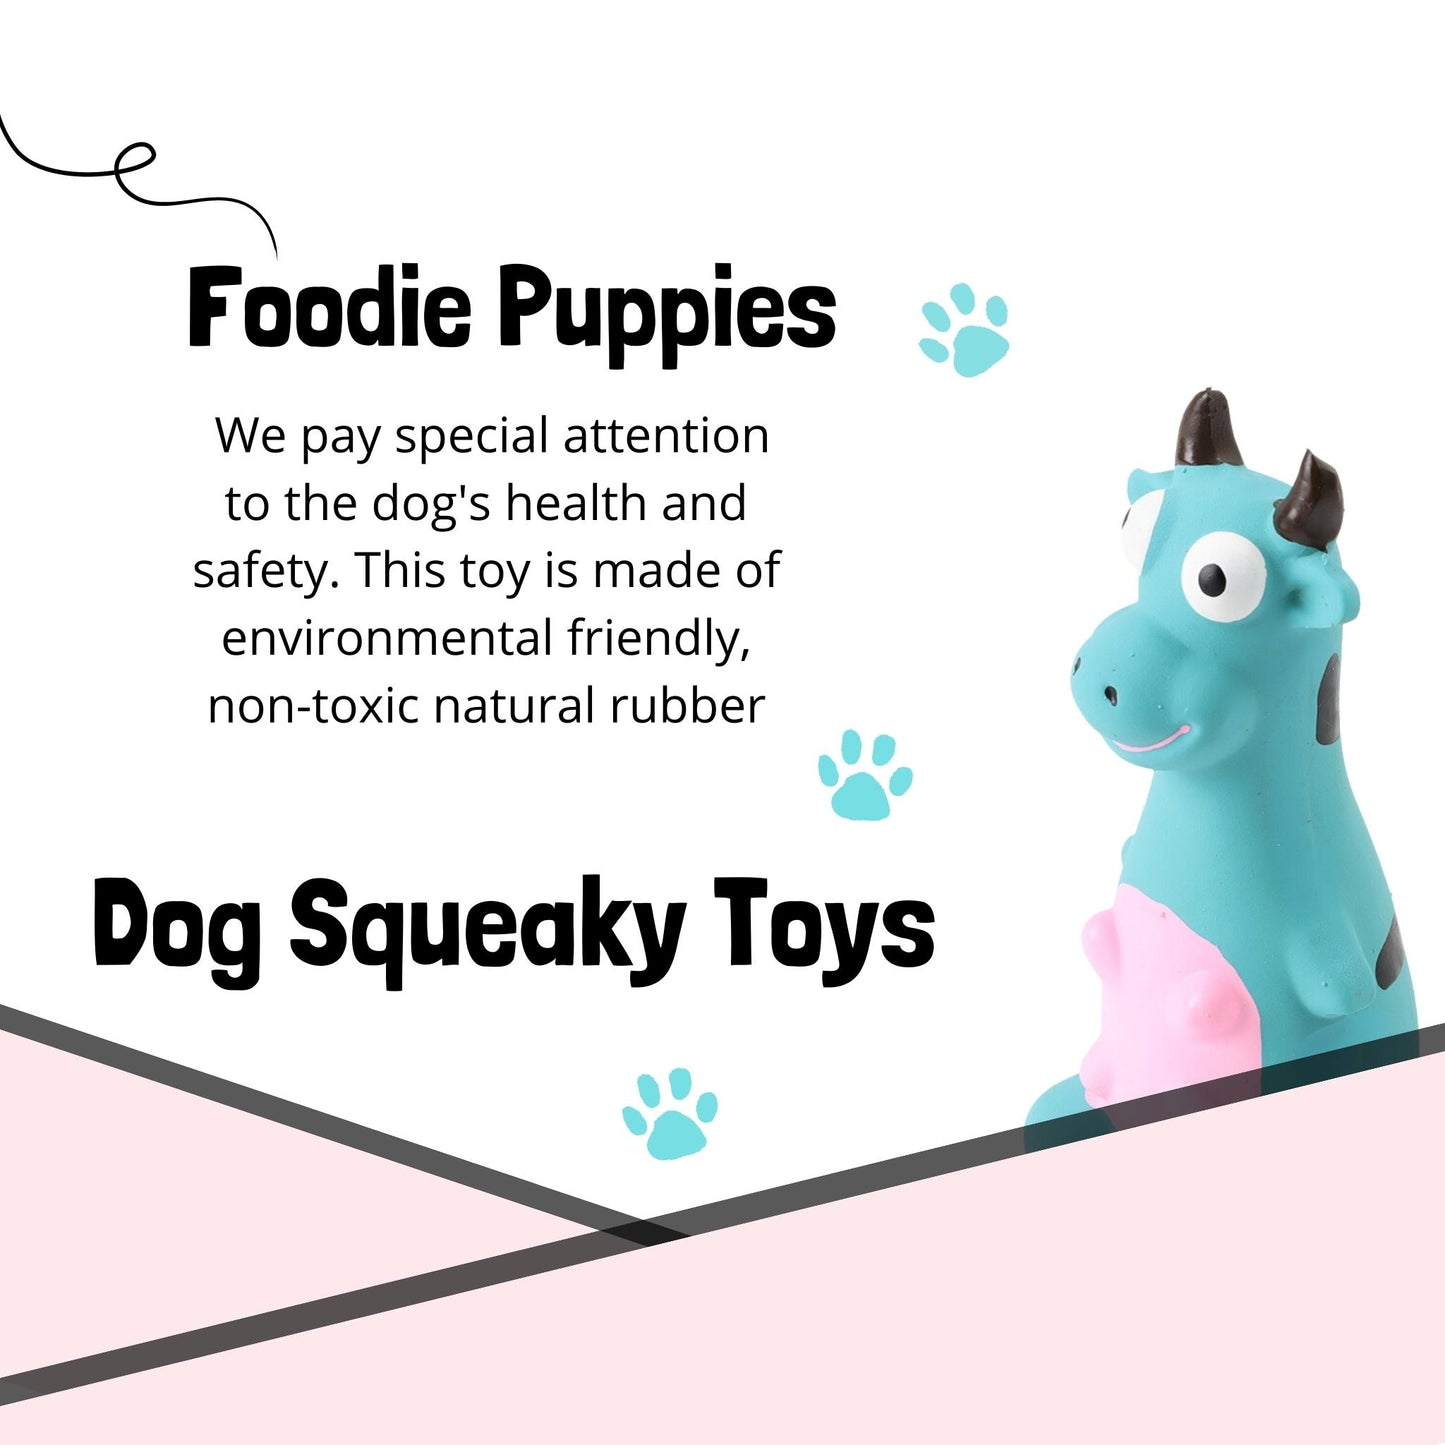 Foodie Puppies Latex Rubber Squeaky Dog Chew Toy - Blue Bull